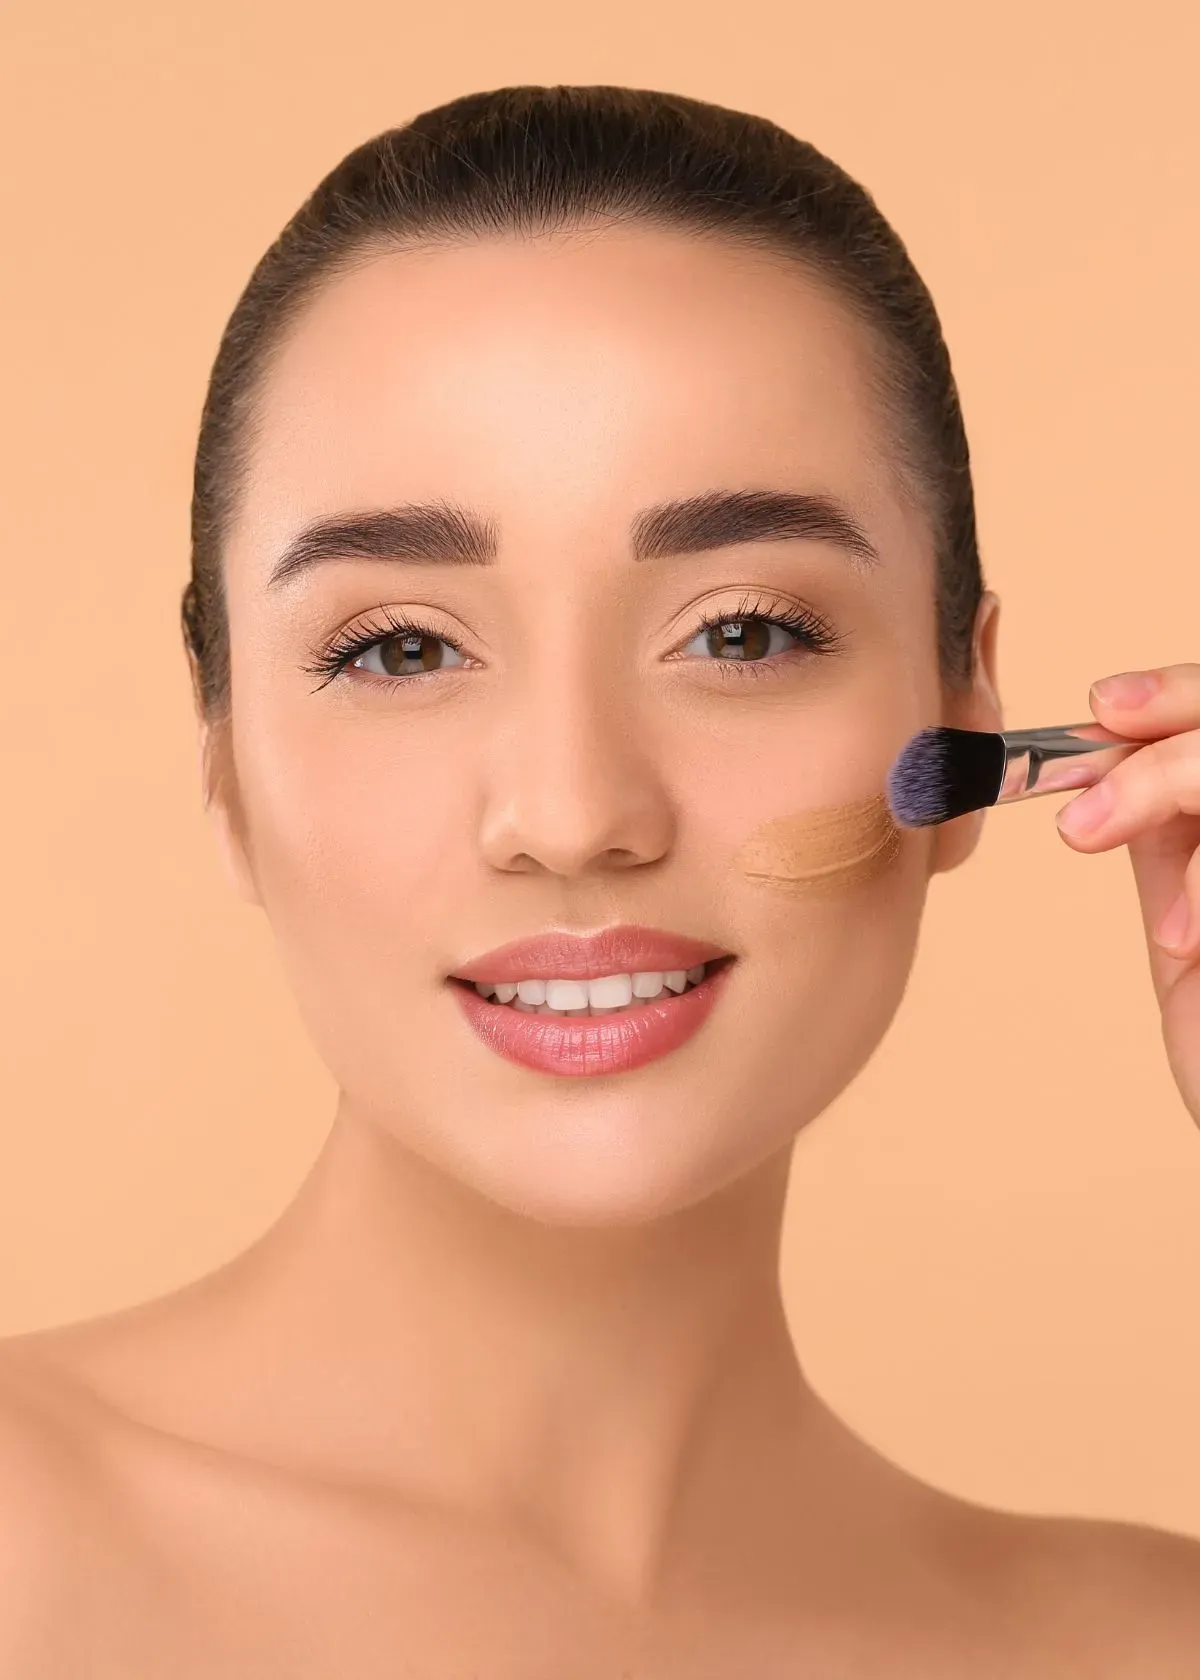 How to Apply Full Coverage Foundation?